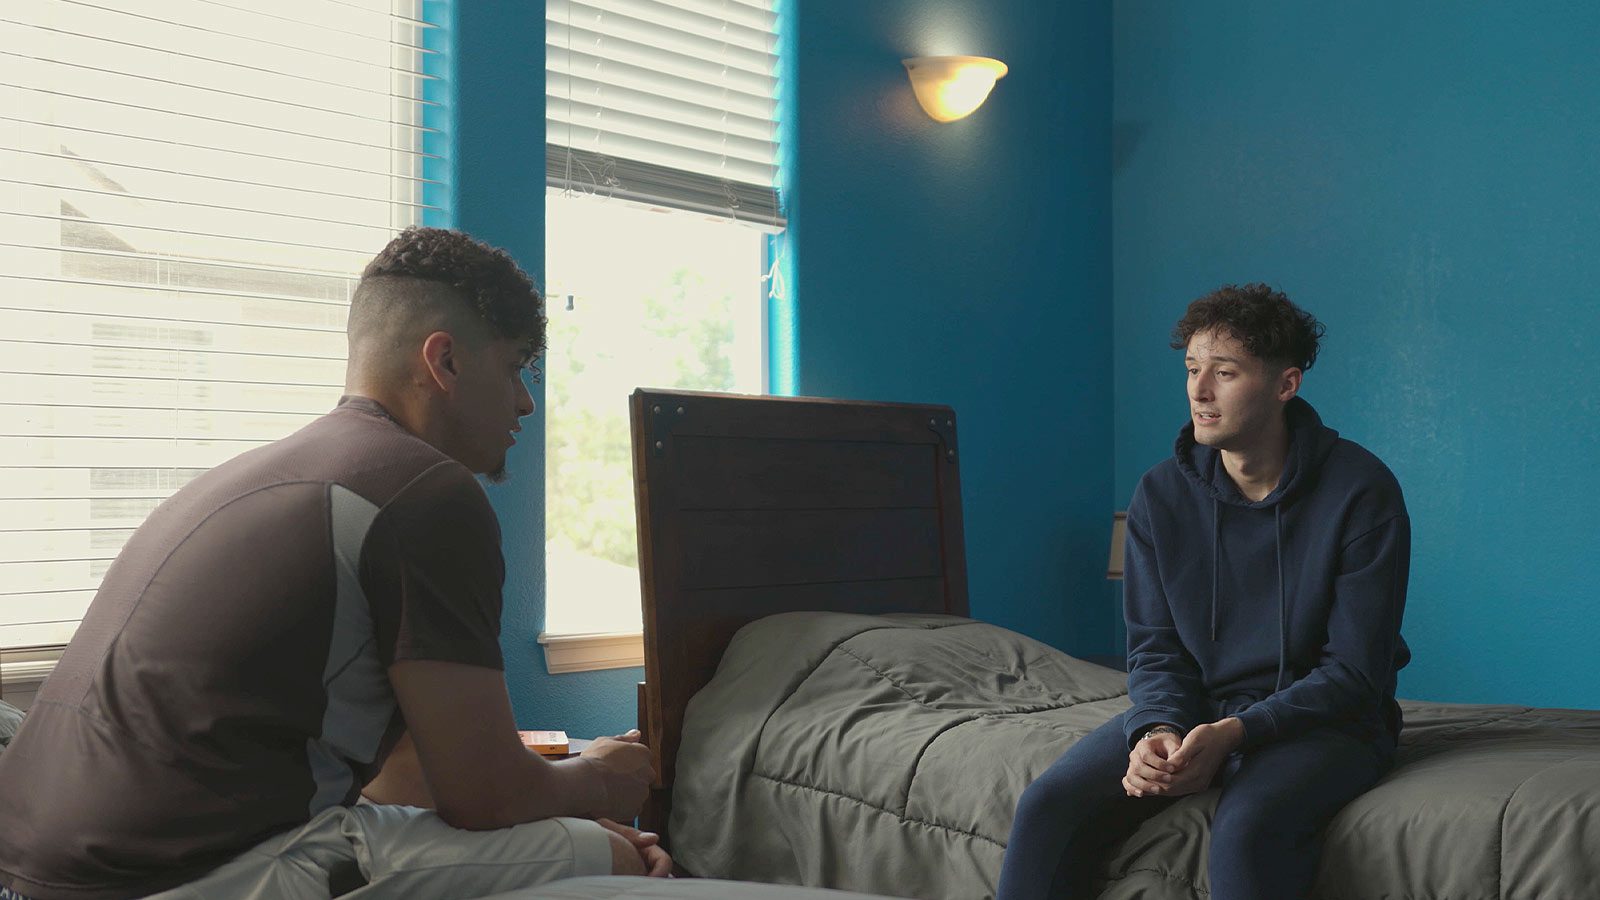 Two men having a conversation in a bedroom.